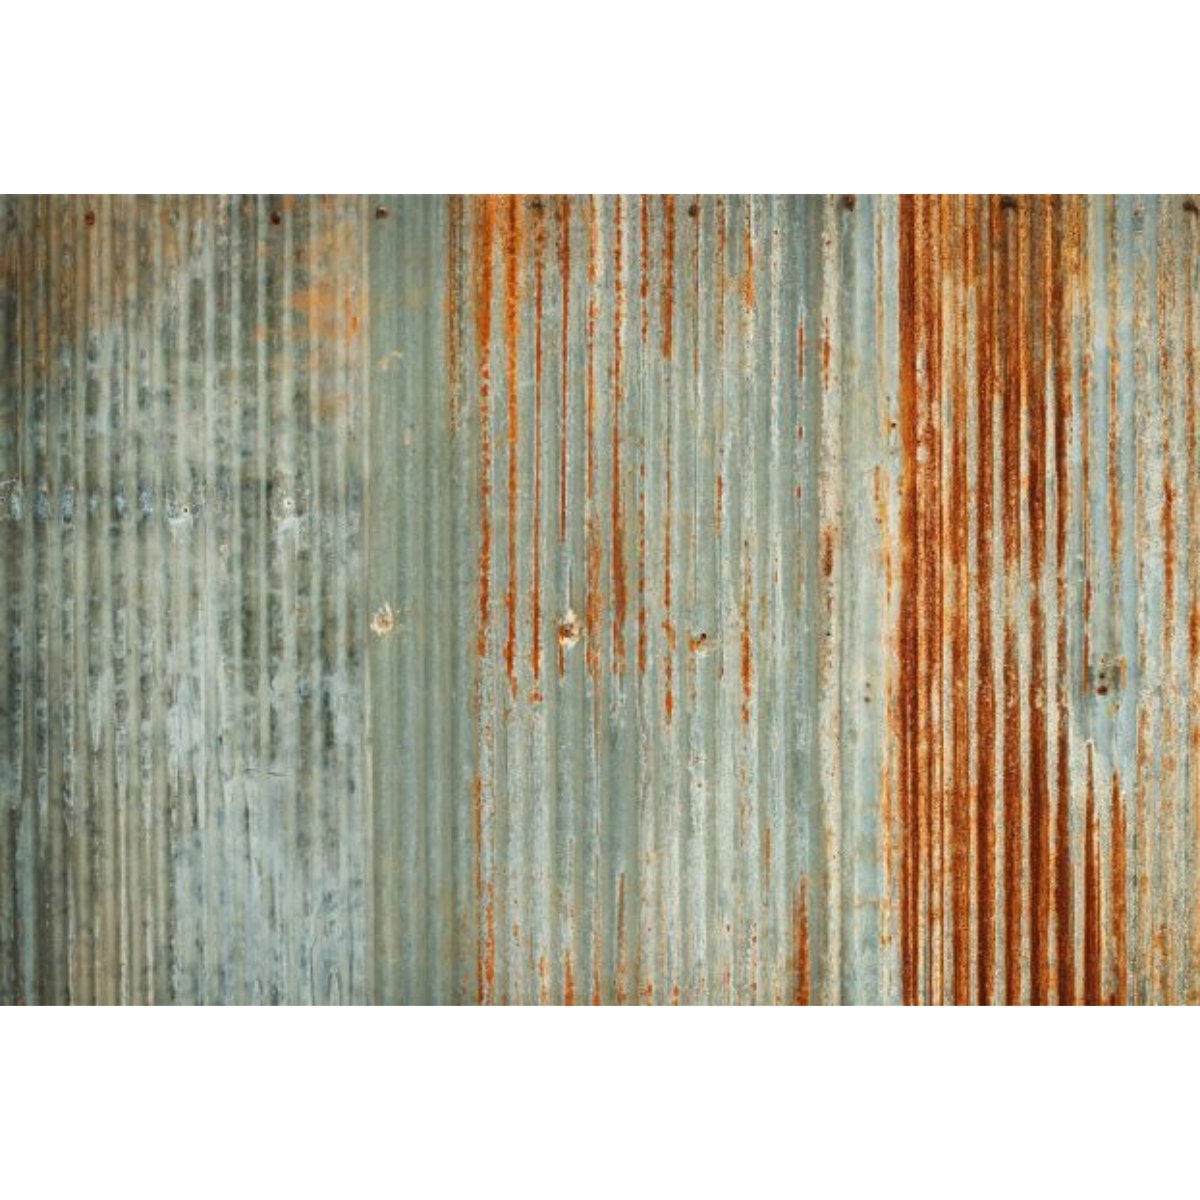 Roycycled Treasures - Corrugated Metal Decoupage Paper - 20x30in - Rustic River Home